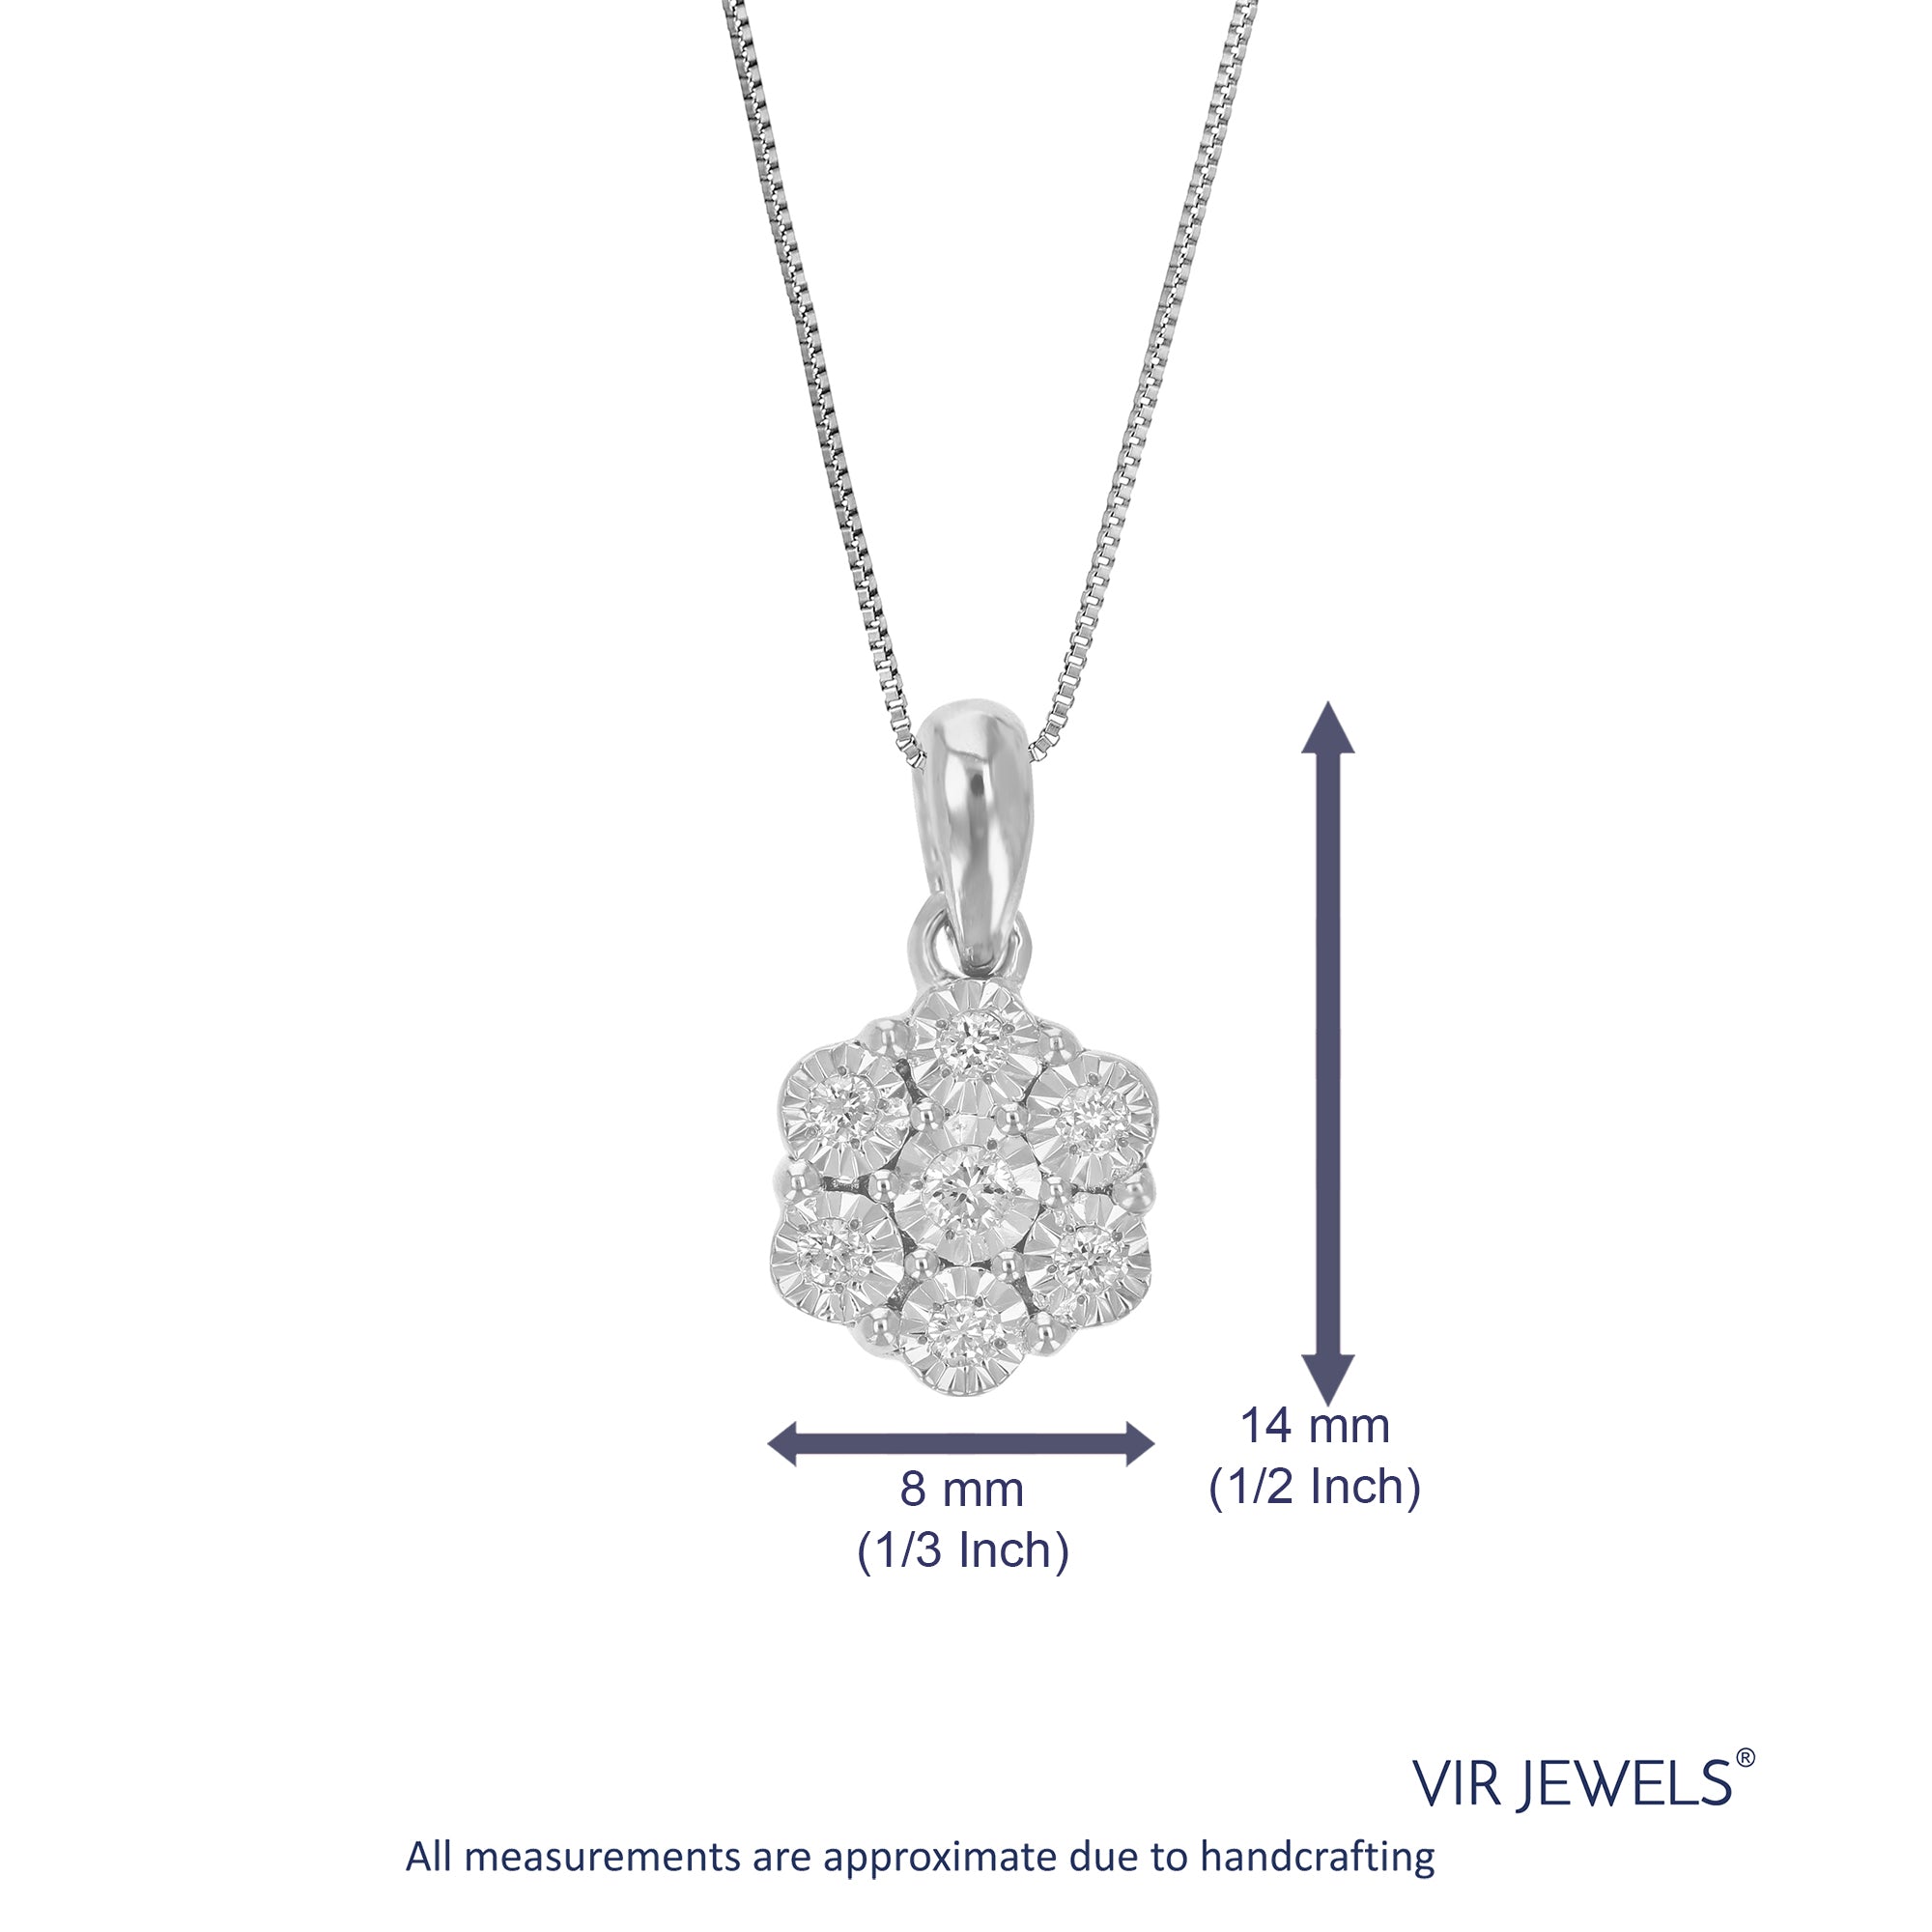 1/10 cttw Diamond Pendant Necklace for Women, Lab Grown Diamond Mom Pendant Necklace in .925 Sterling Silver with Chain, Size 1/3 Inch